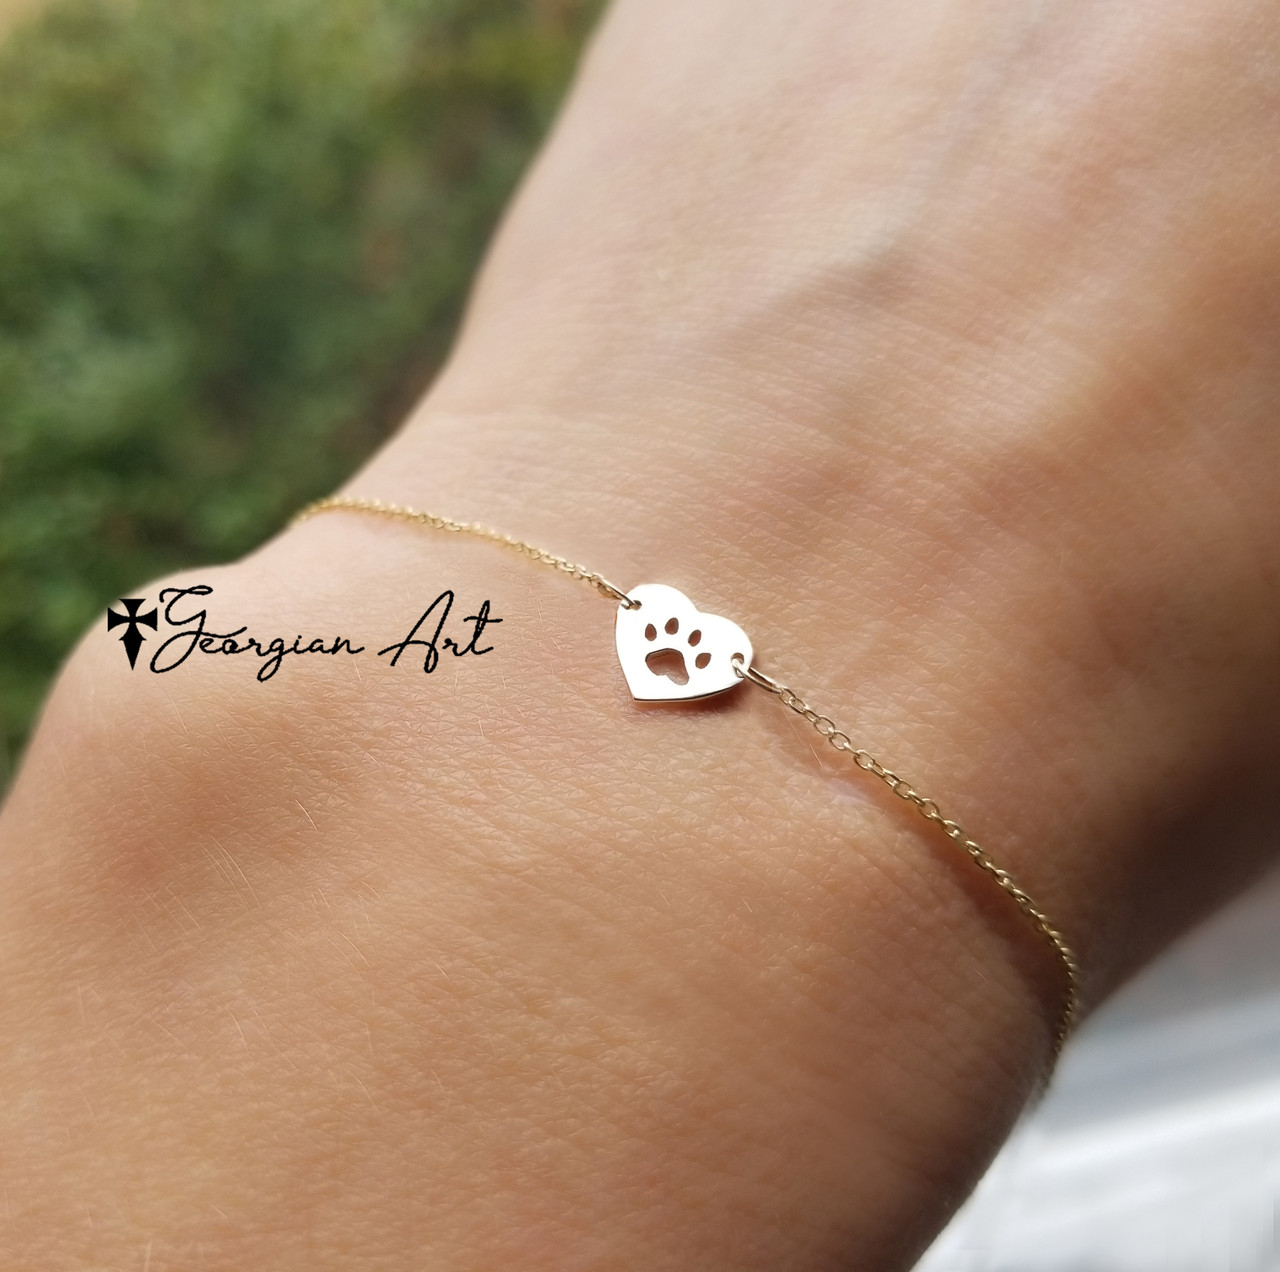 14K Gold Plated Adjustable Cute Pet Paw Foot Chain Beach Anklets for Women Teen Girls Jewelry Birthday Gifts JIANGYUE Dainty Layered Dog Paw Print and Bones Anklet with Initial Anklets Bracelets